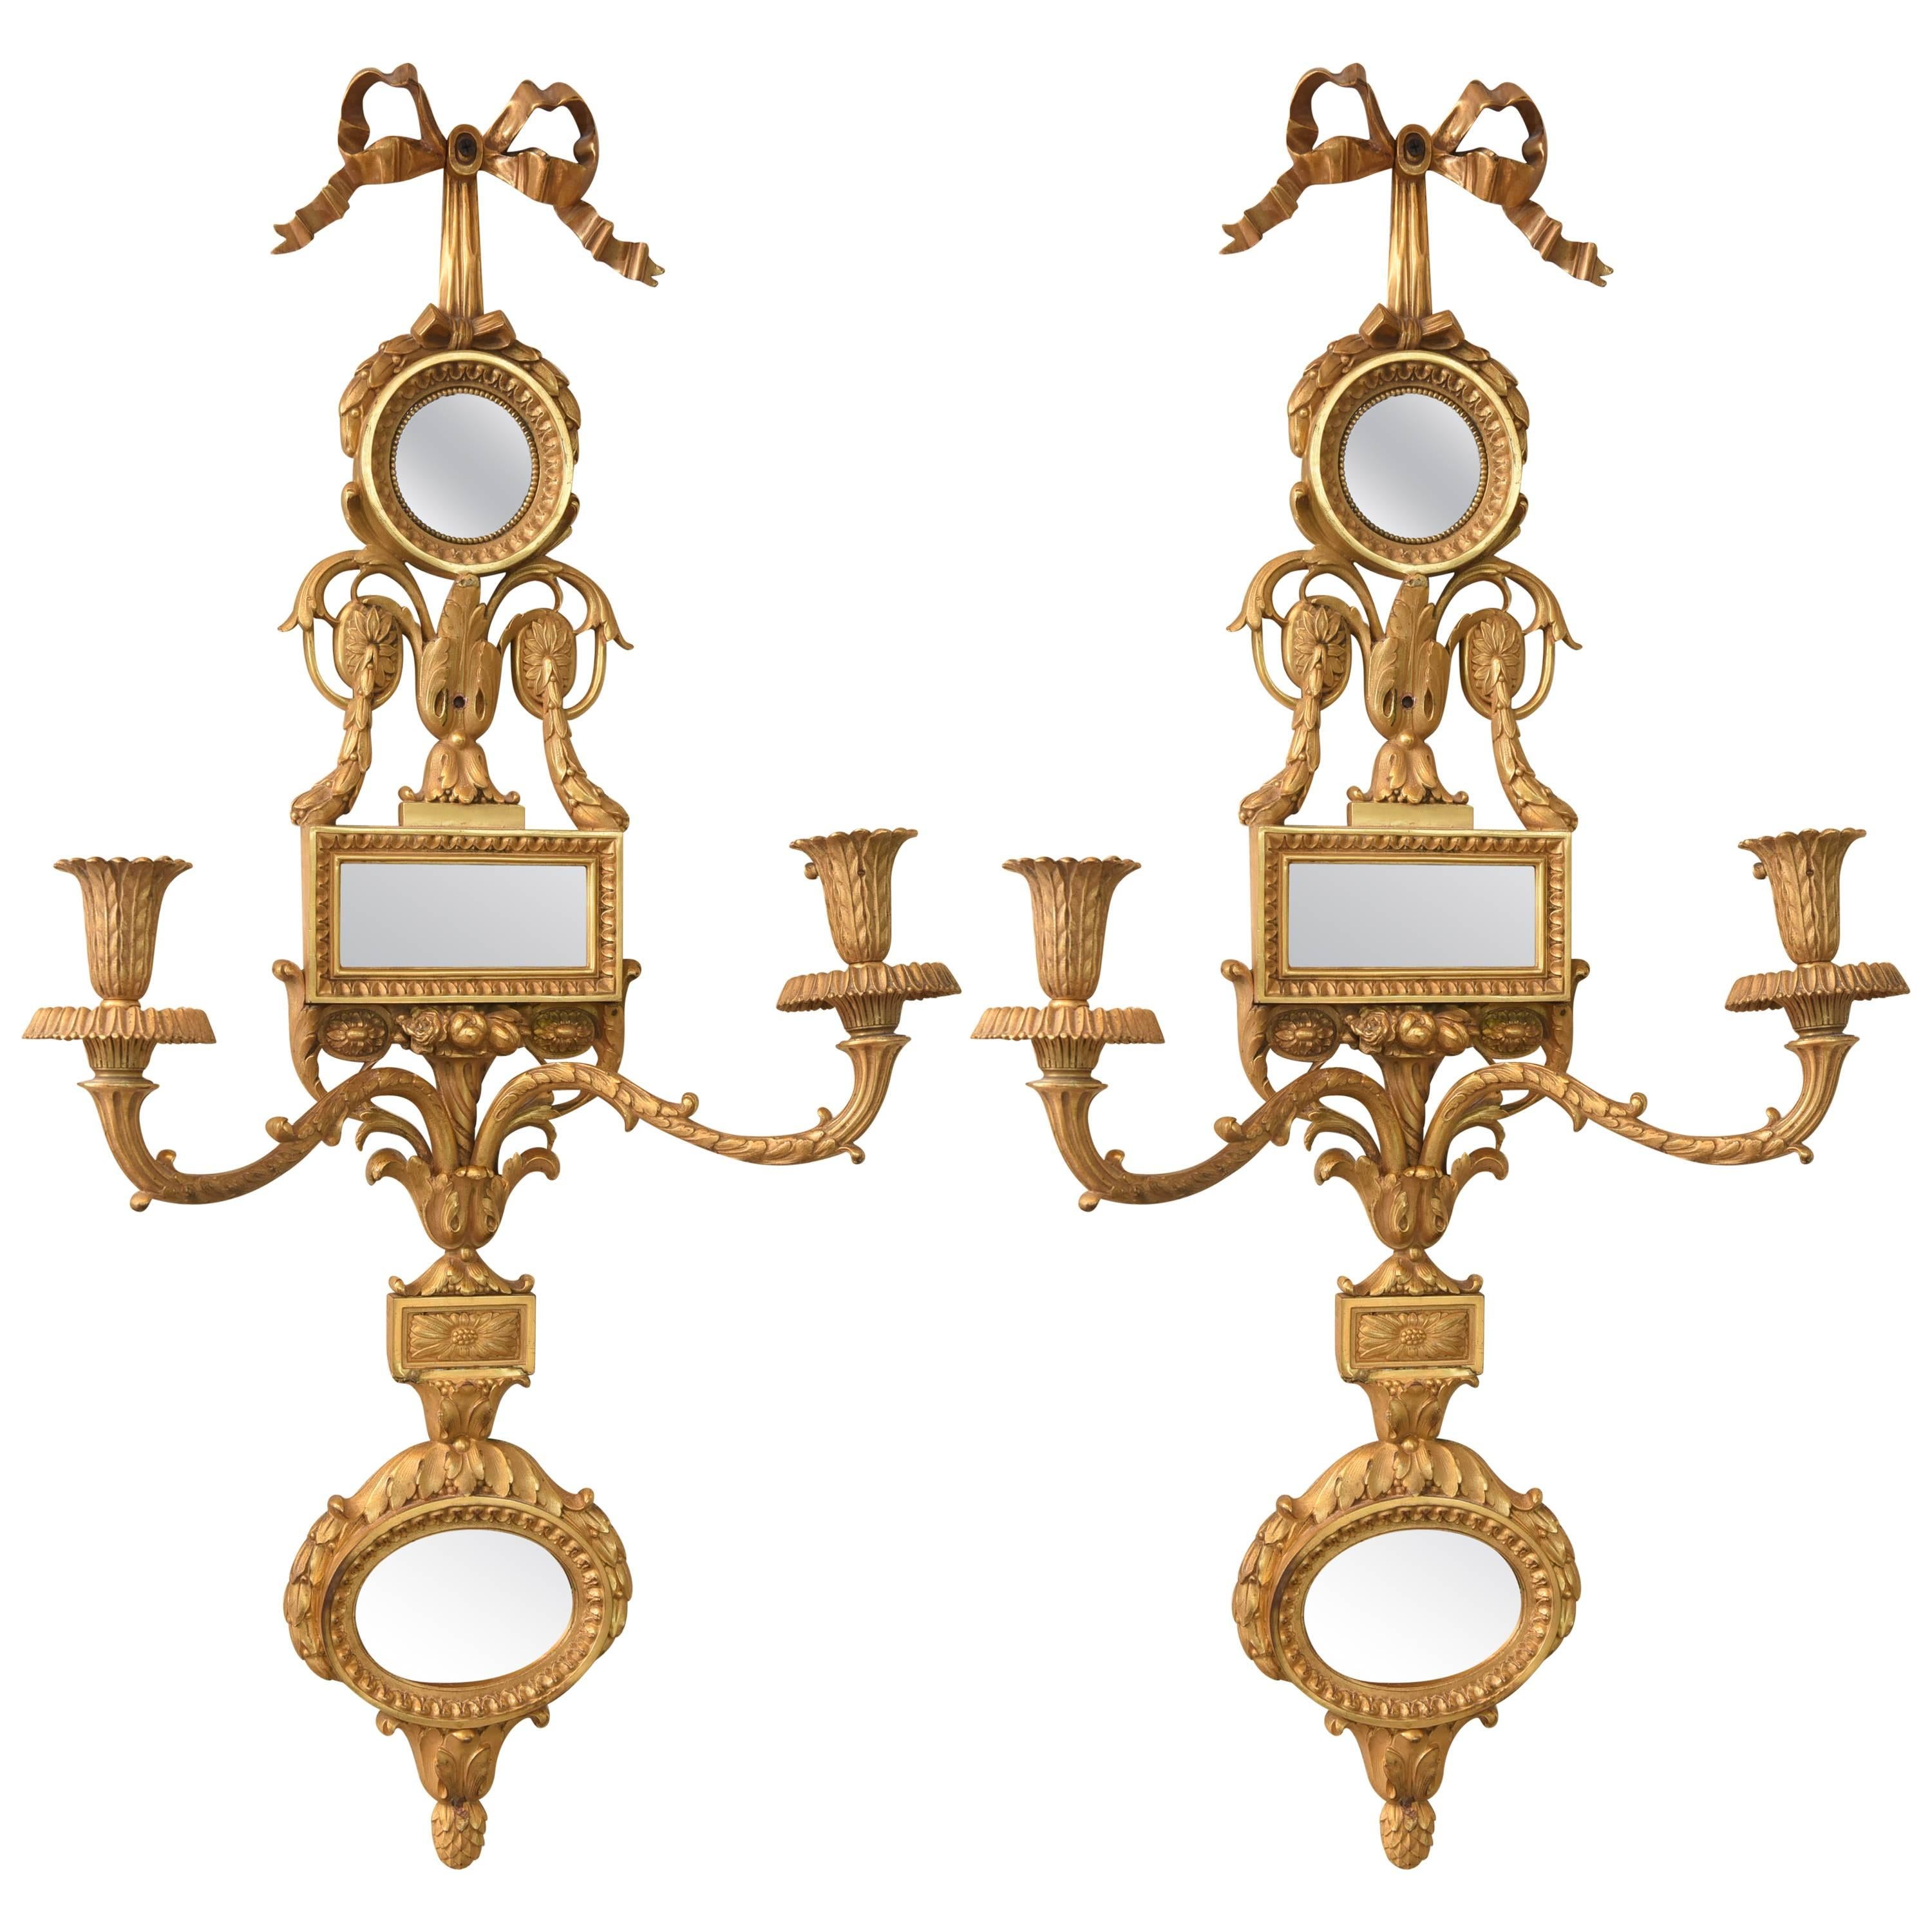 Pair of Bronze Dore Sconces with Unusual Mirrored Backplates by E.F. Caldwell